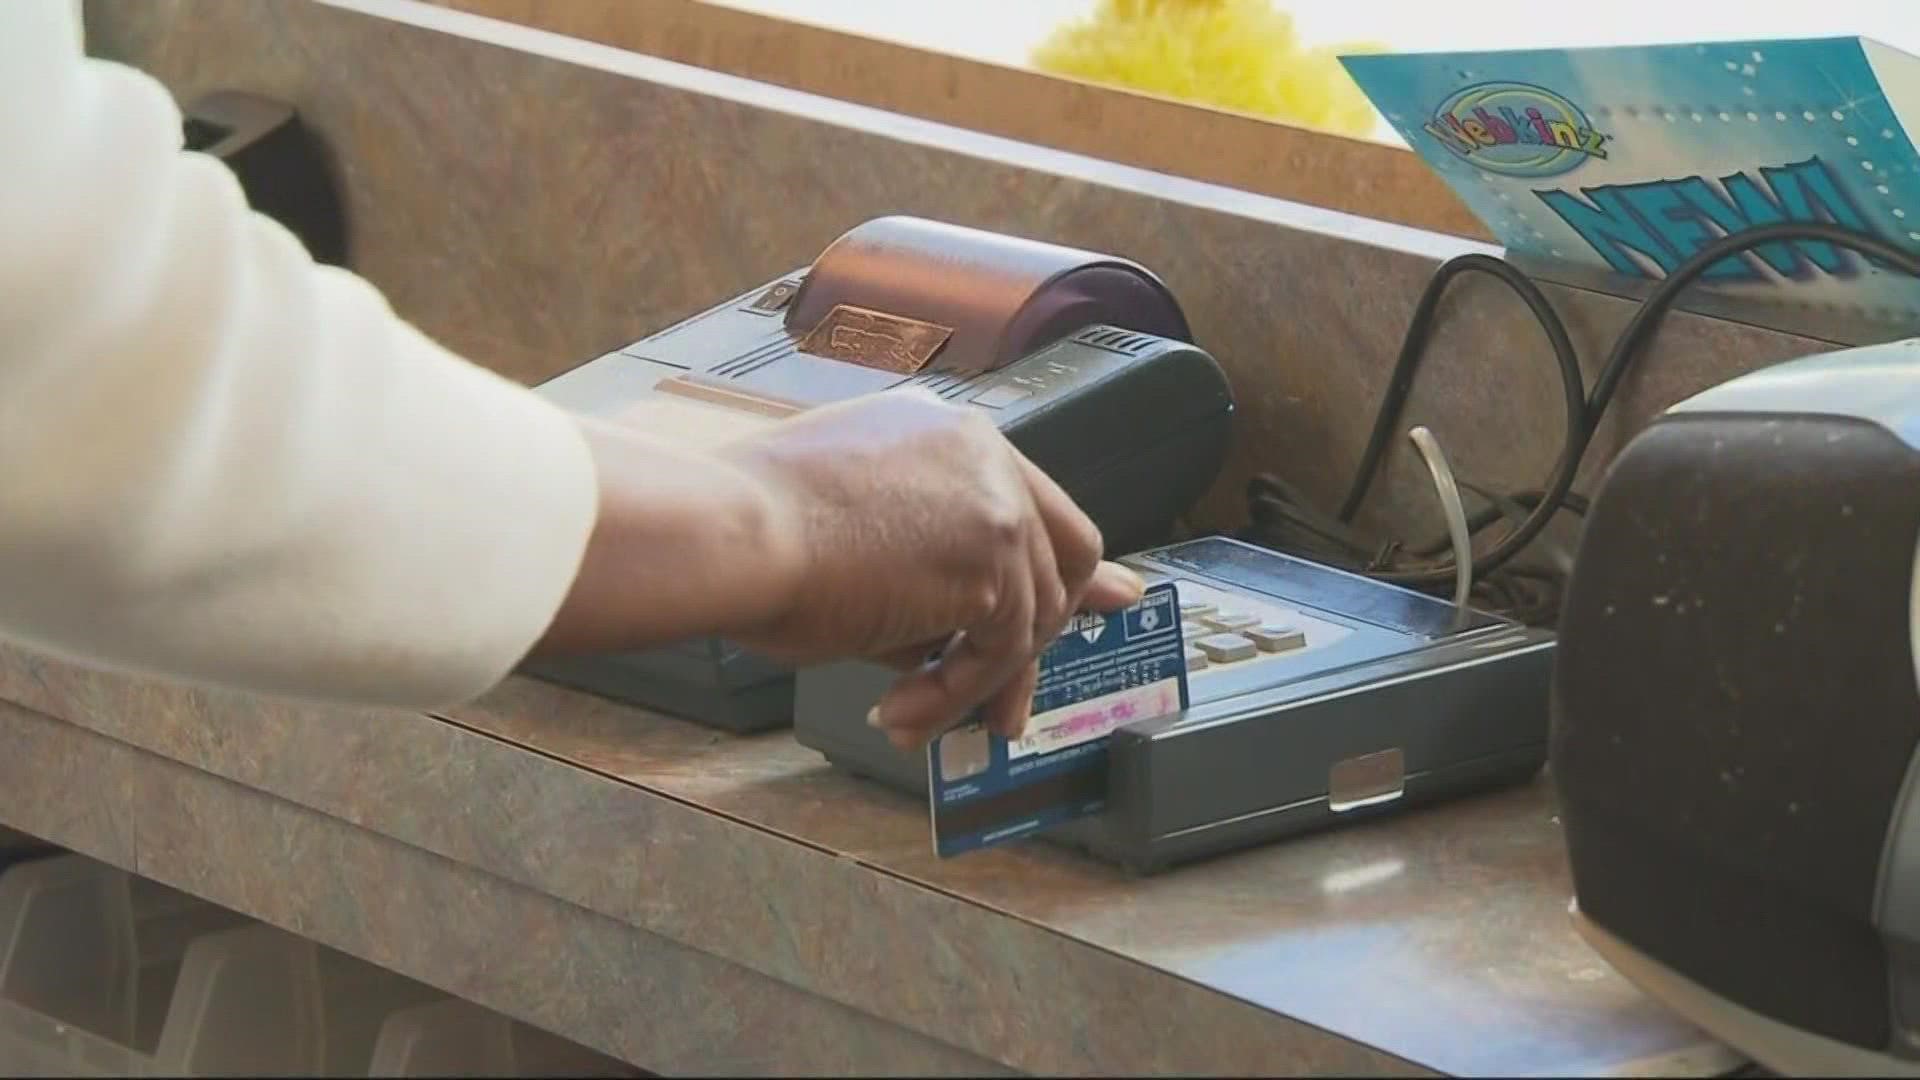 Card skimmer scams on the rise, DSHS says